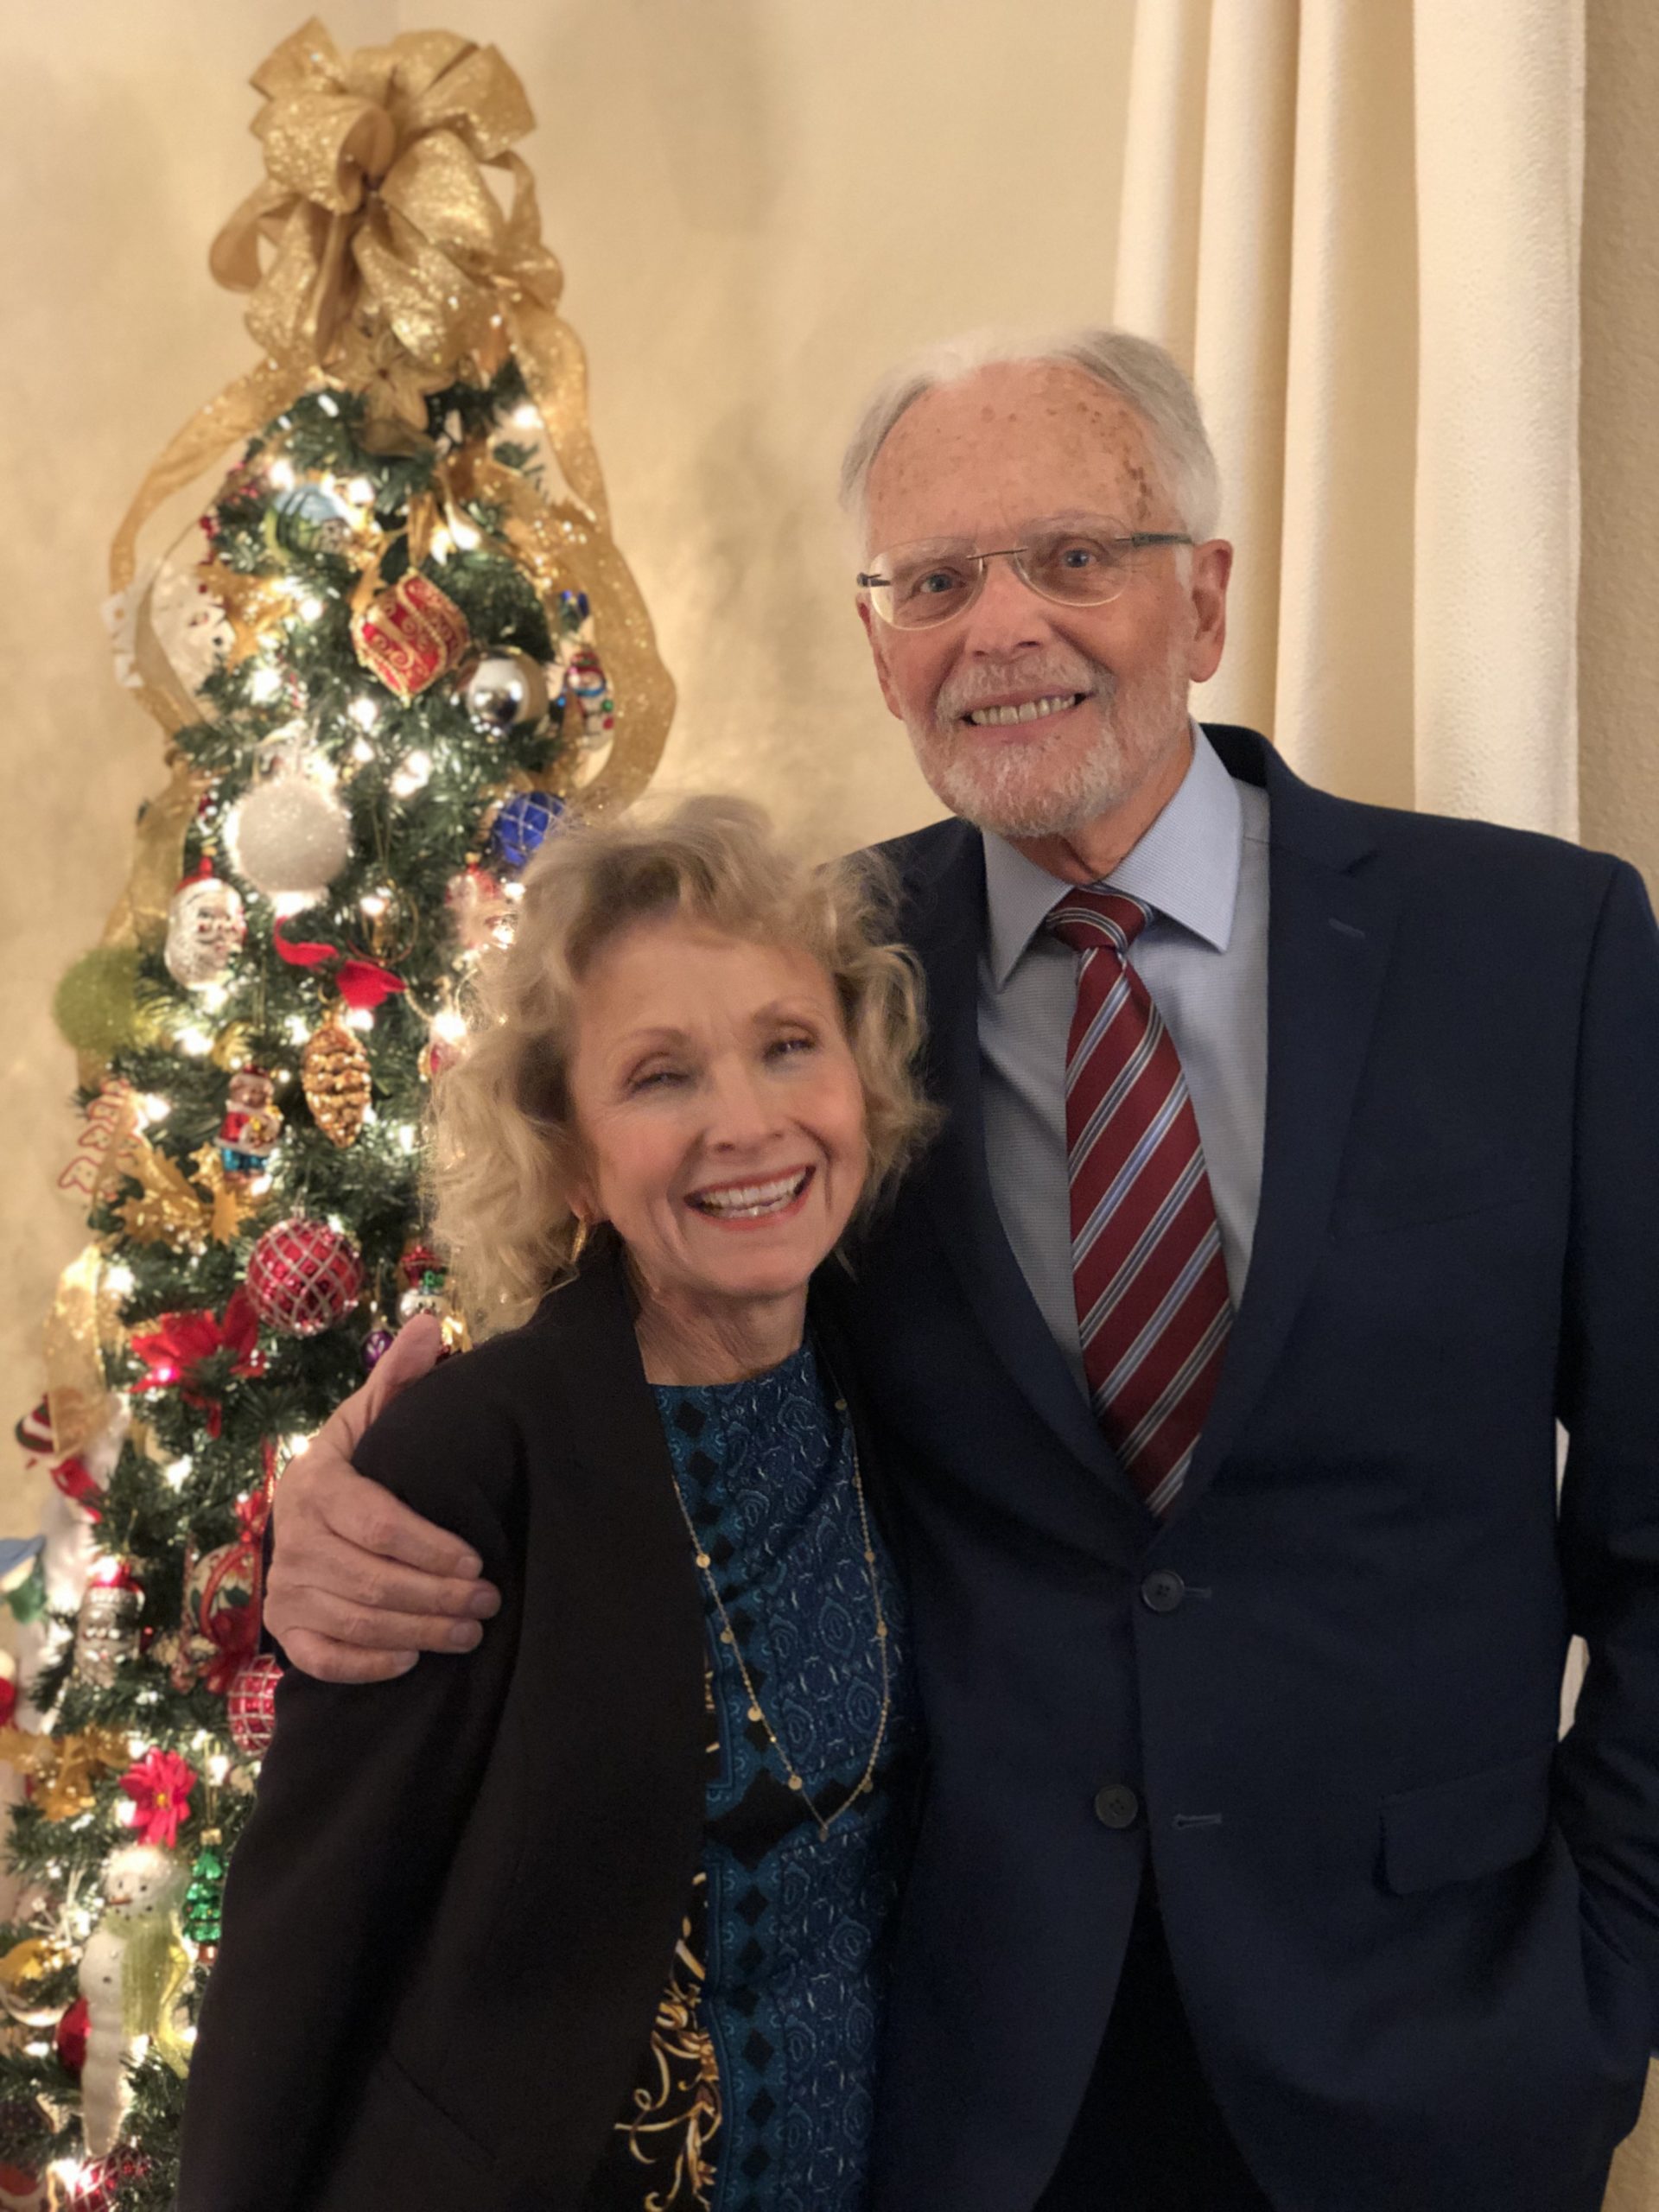 A man and woman couple in their 60's, smiling at the camera with a Christmas tree in the background